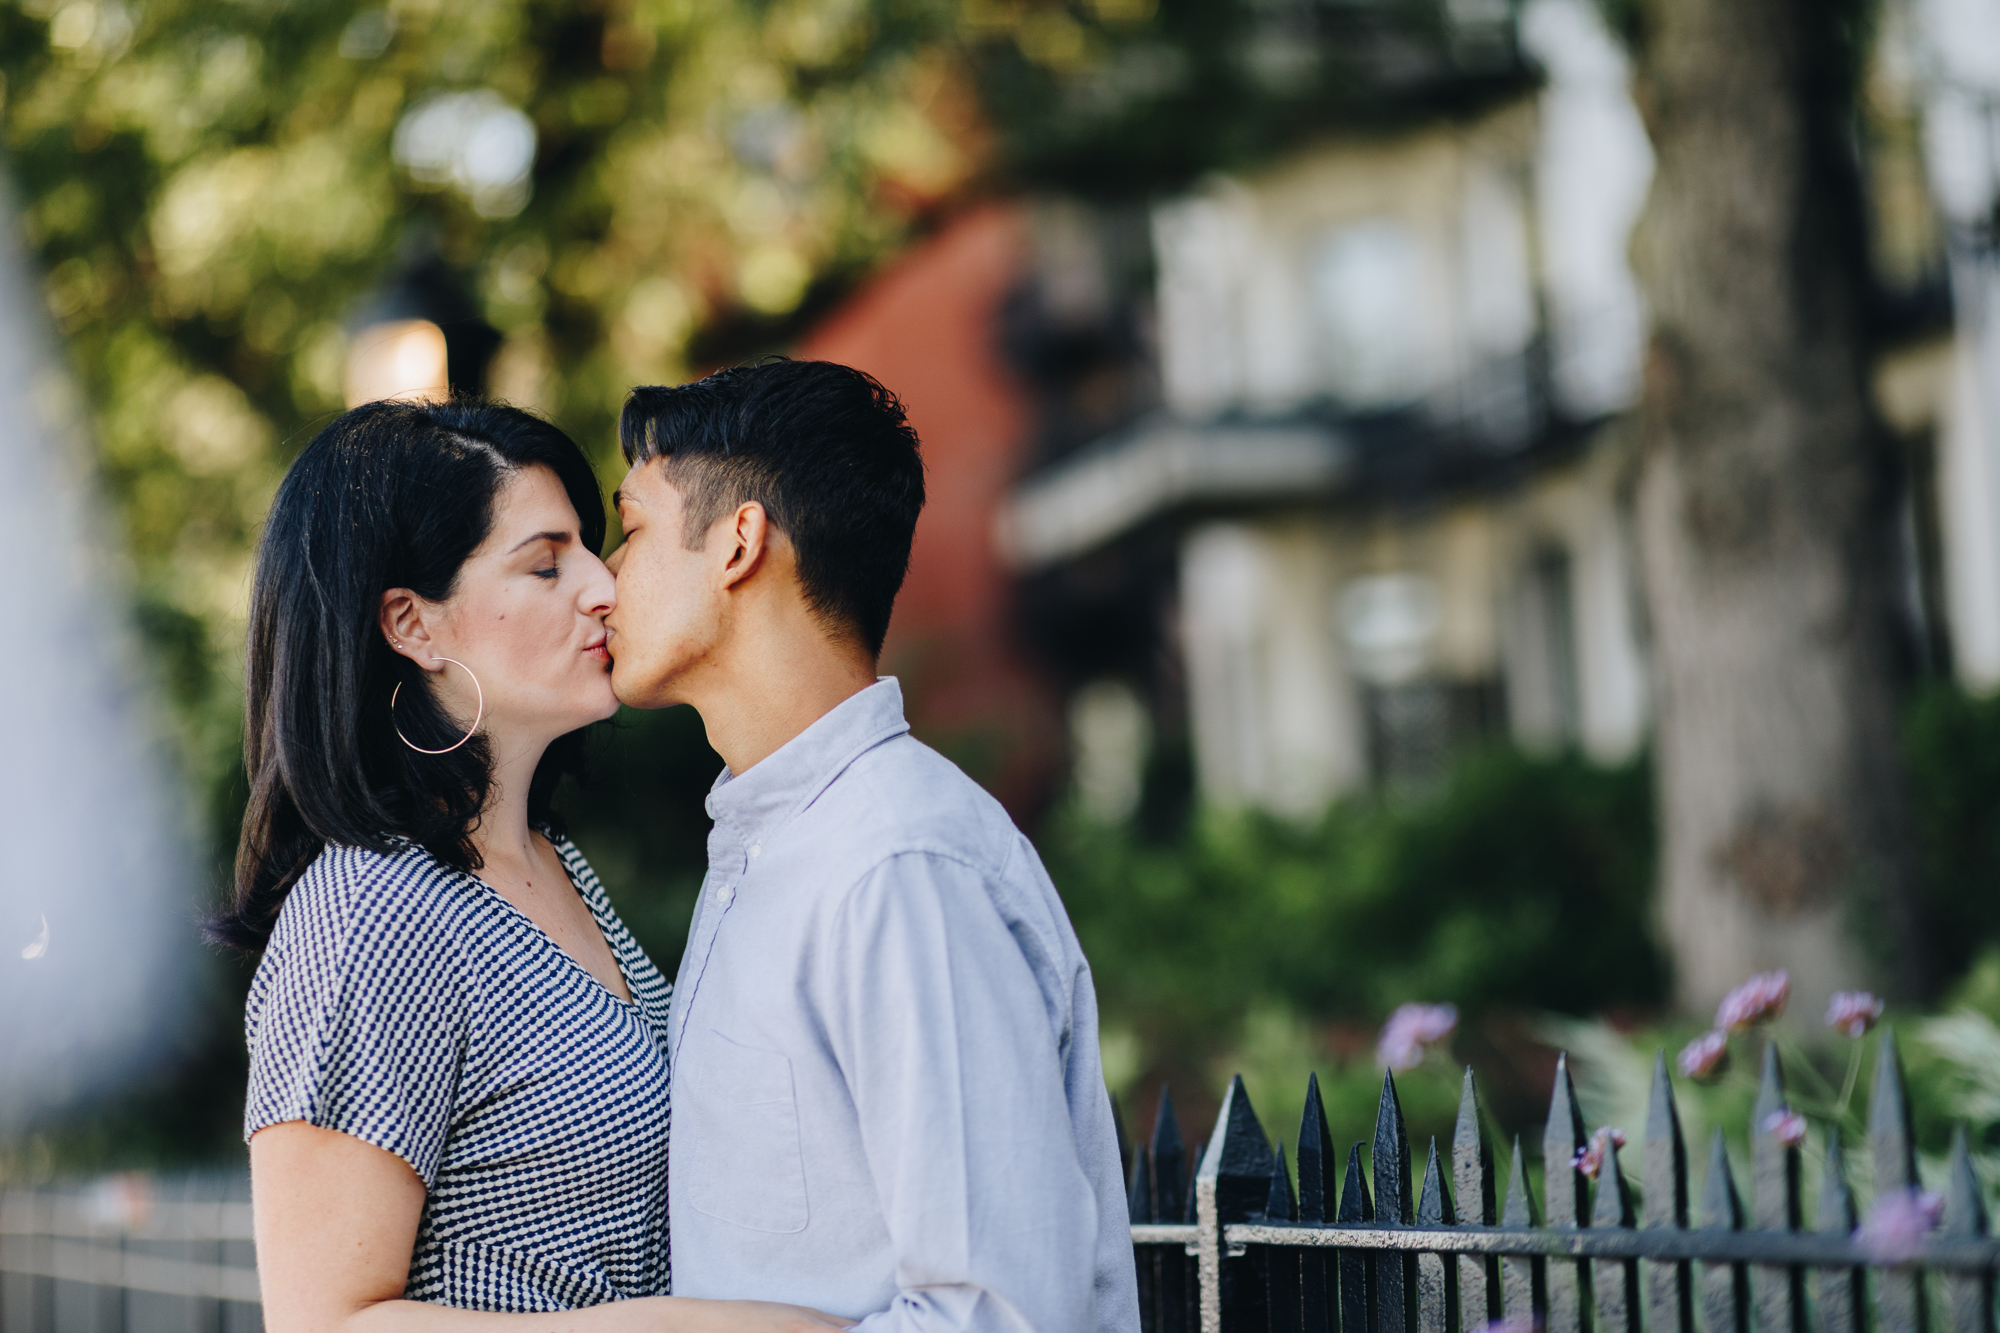 Lovely Brooklyn Heights Promenade Engagement Photos in Summery New York